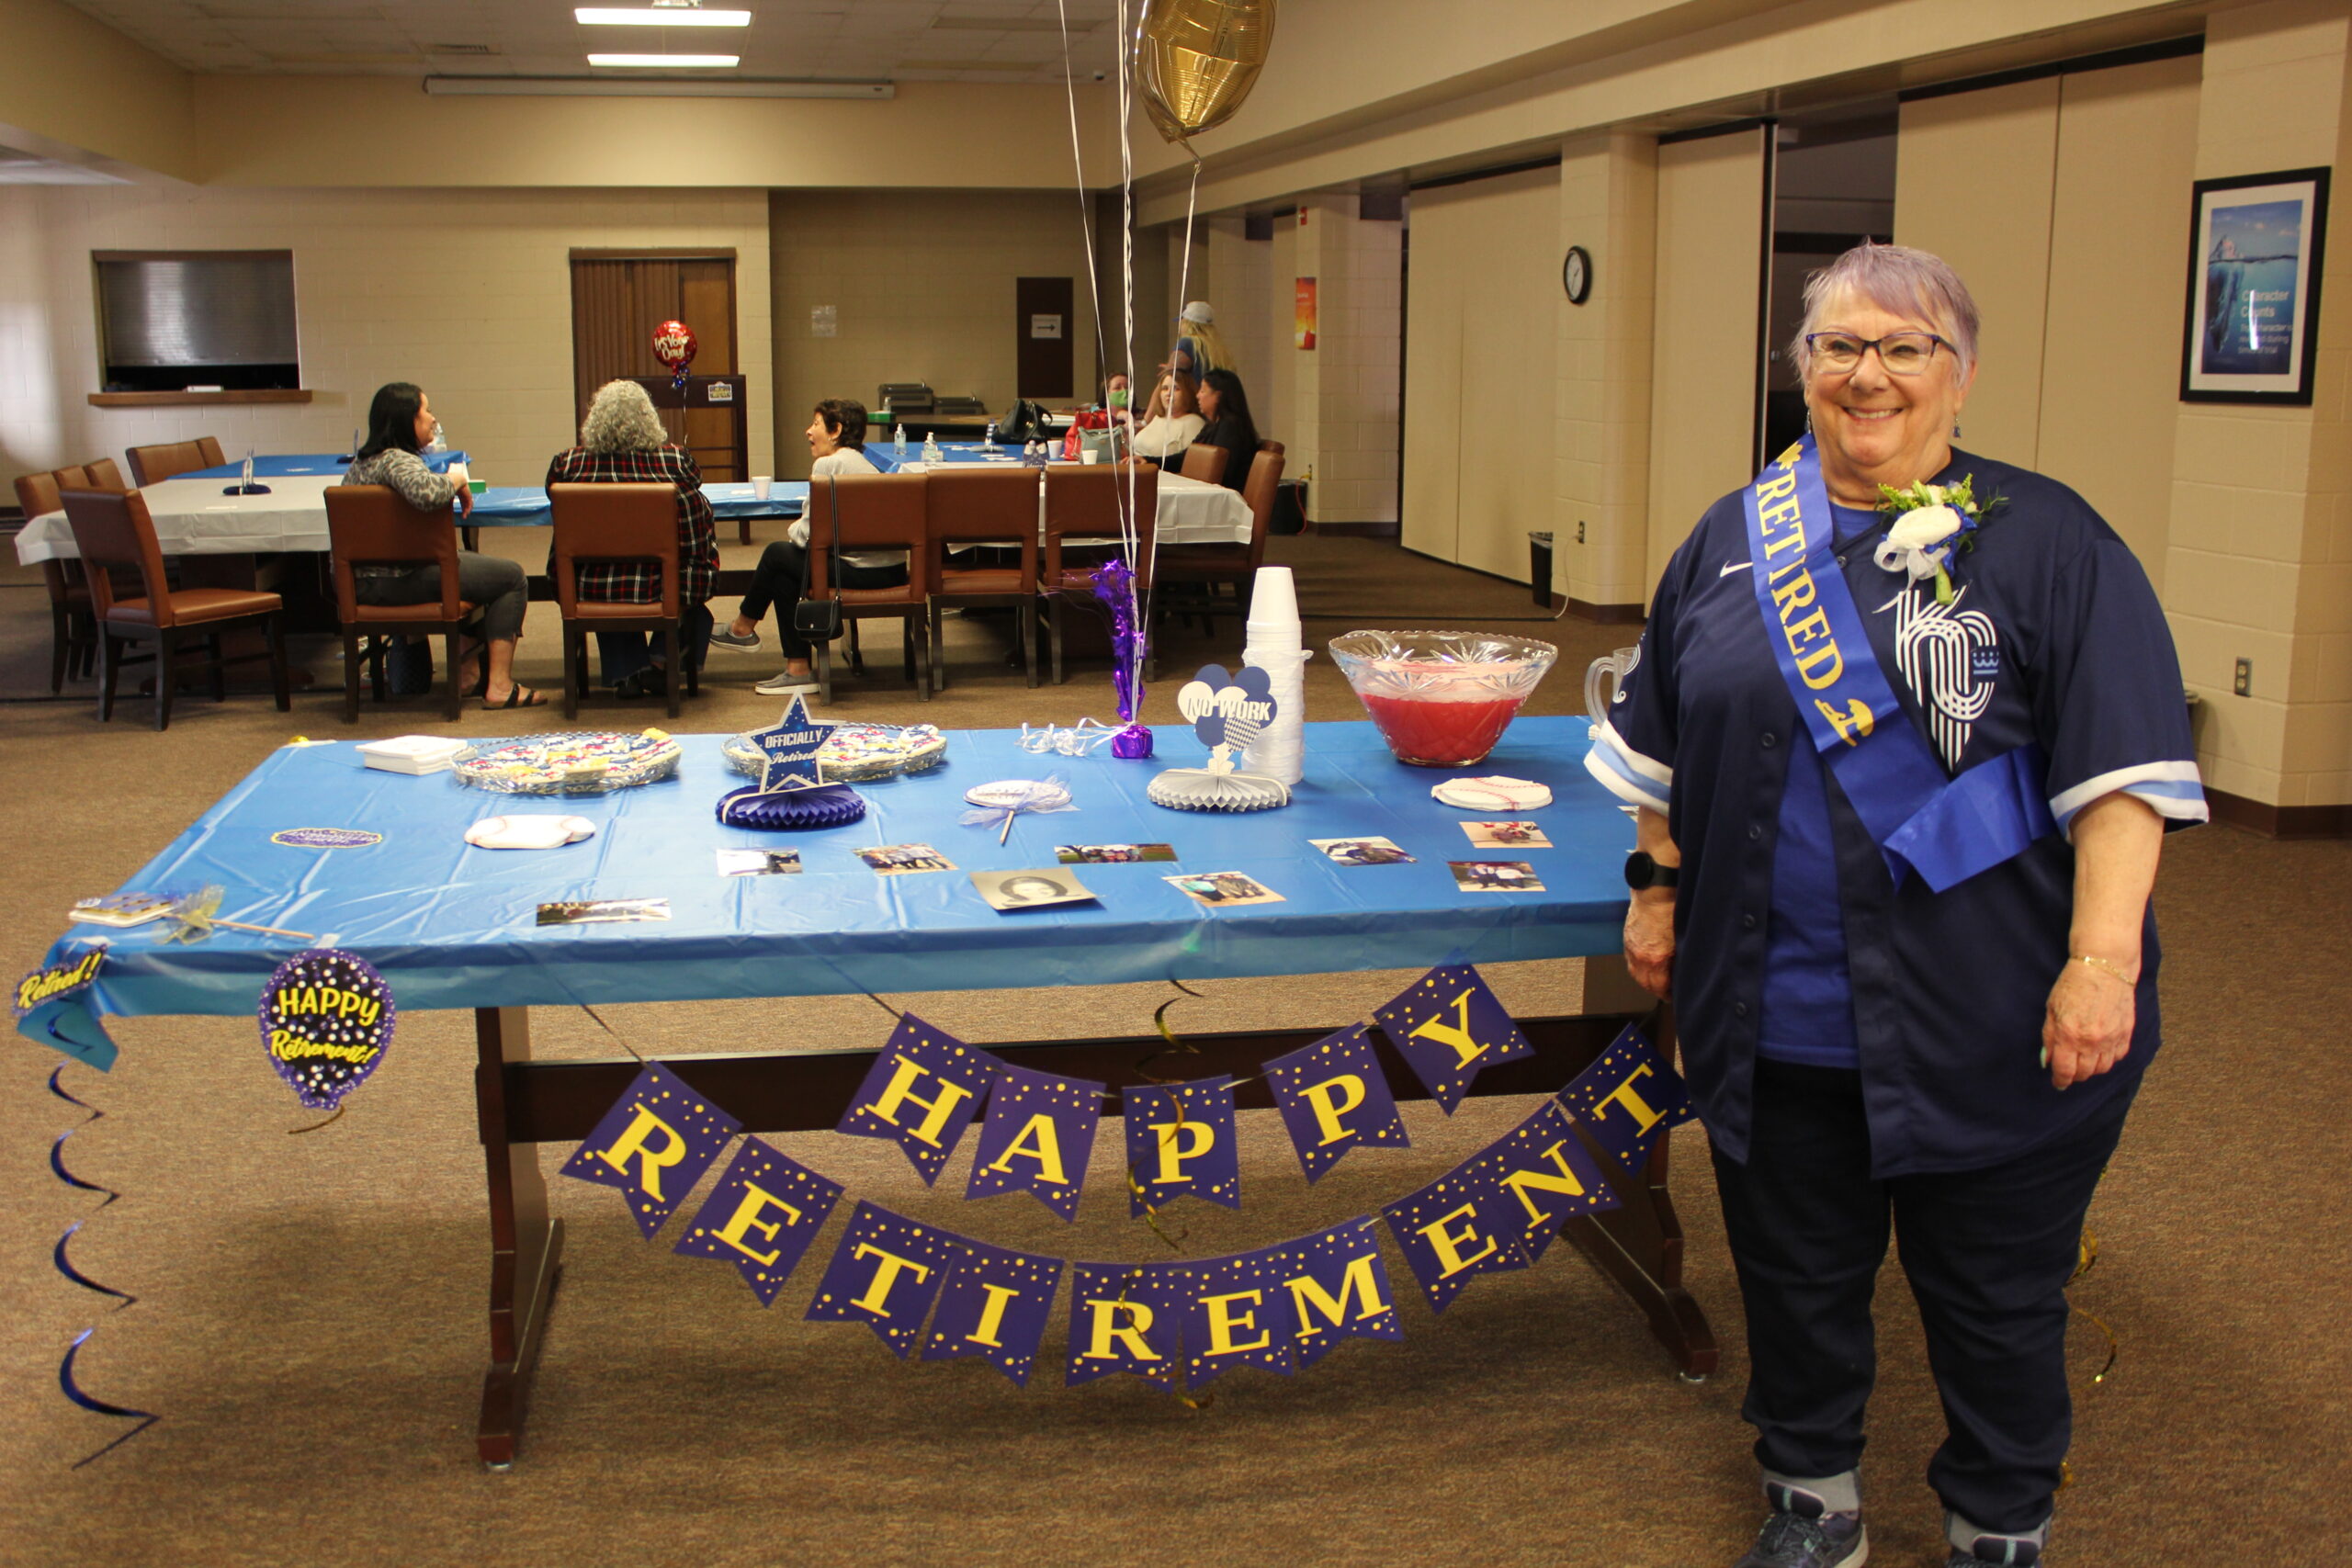 A woman in a "Retired" sash and shirt stands in front of a decorated table at a retirement party. The table has a blue tablecloth, snacks, a punch bowl, party decorations, and a "Happy Retirement" banner. People are seated in the background.